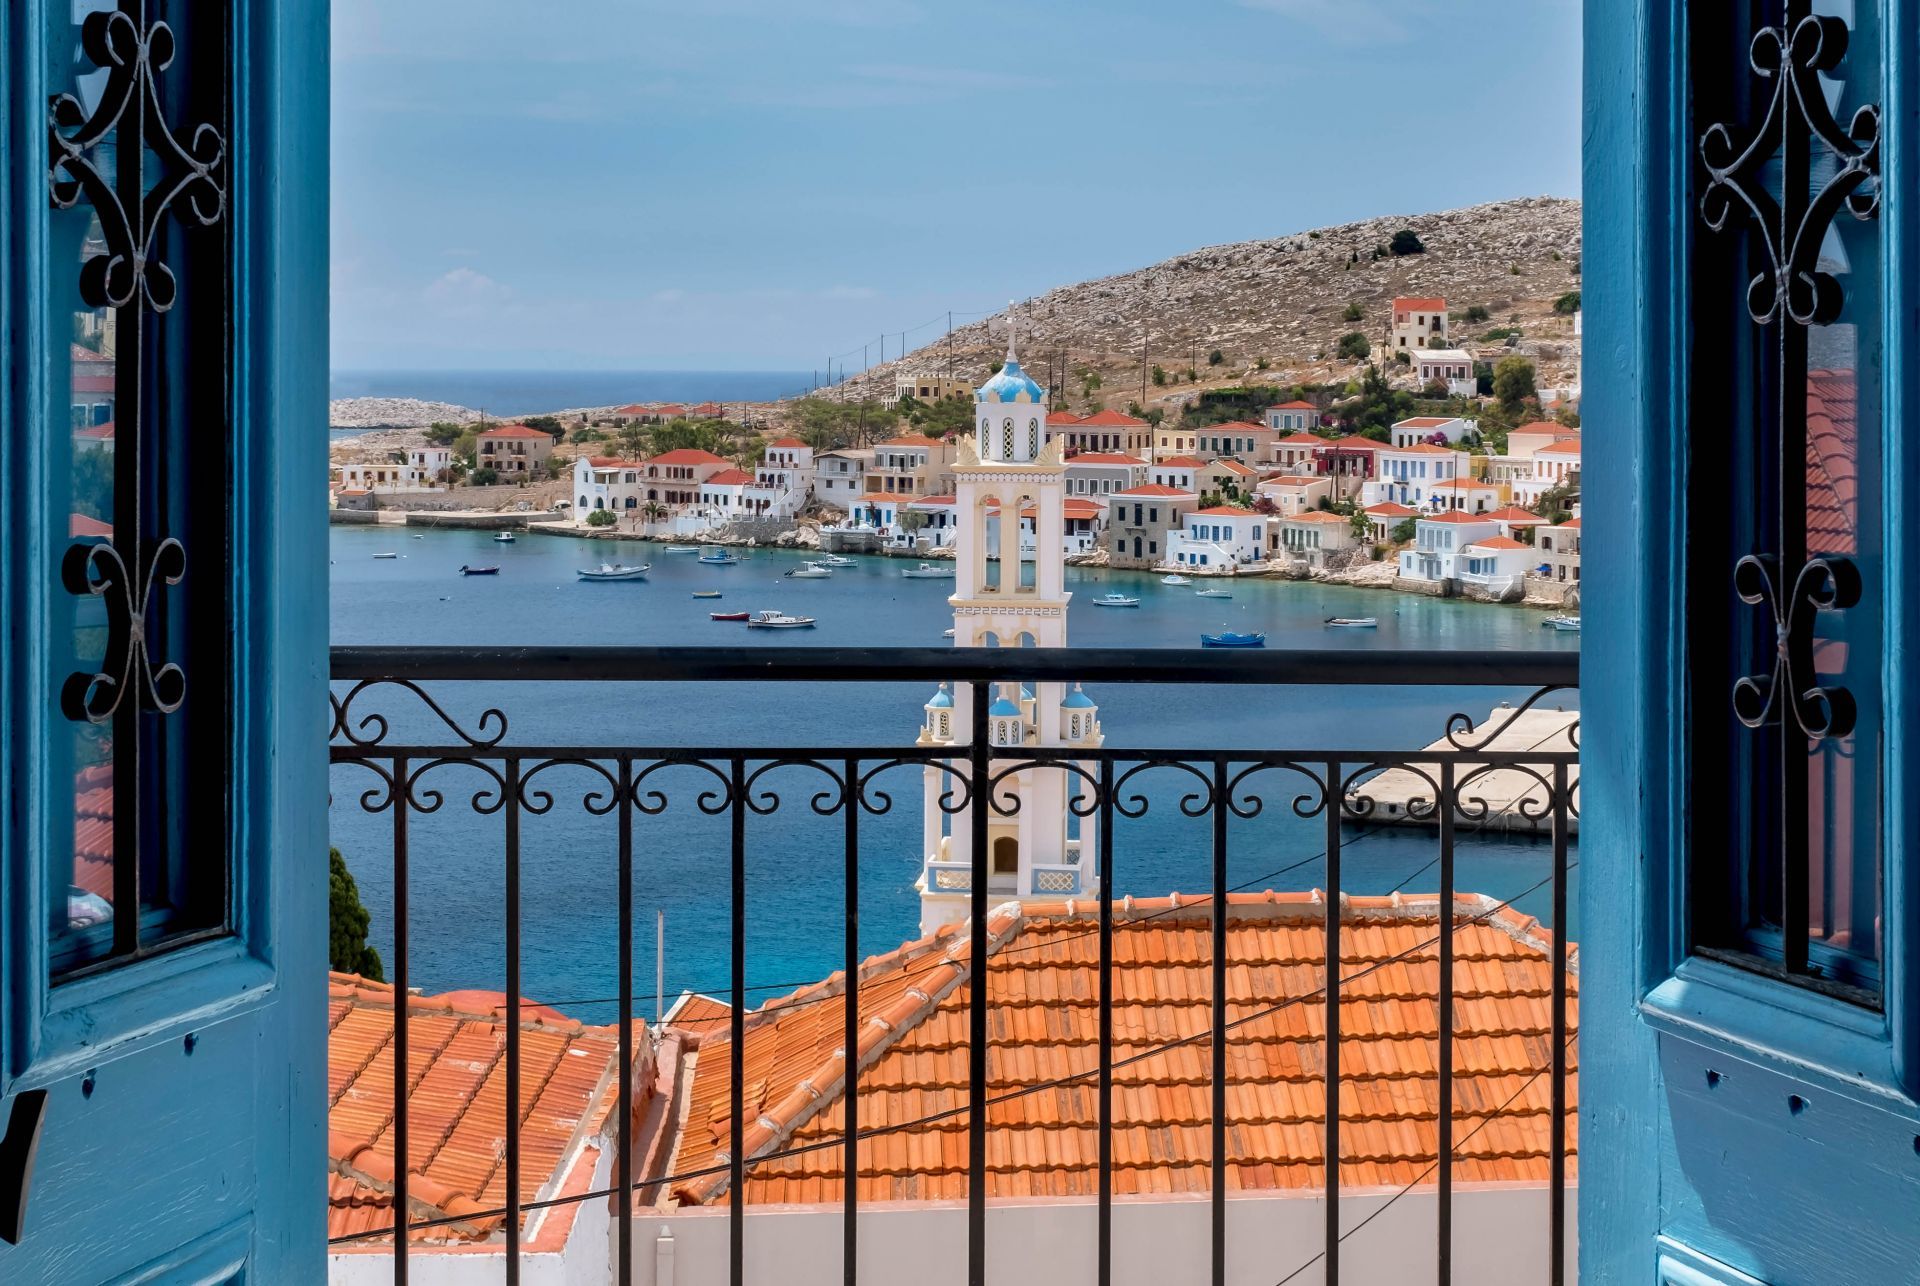 Hotel with amazing view of the harbor of Nimporio, in Halki